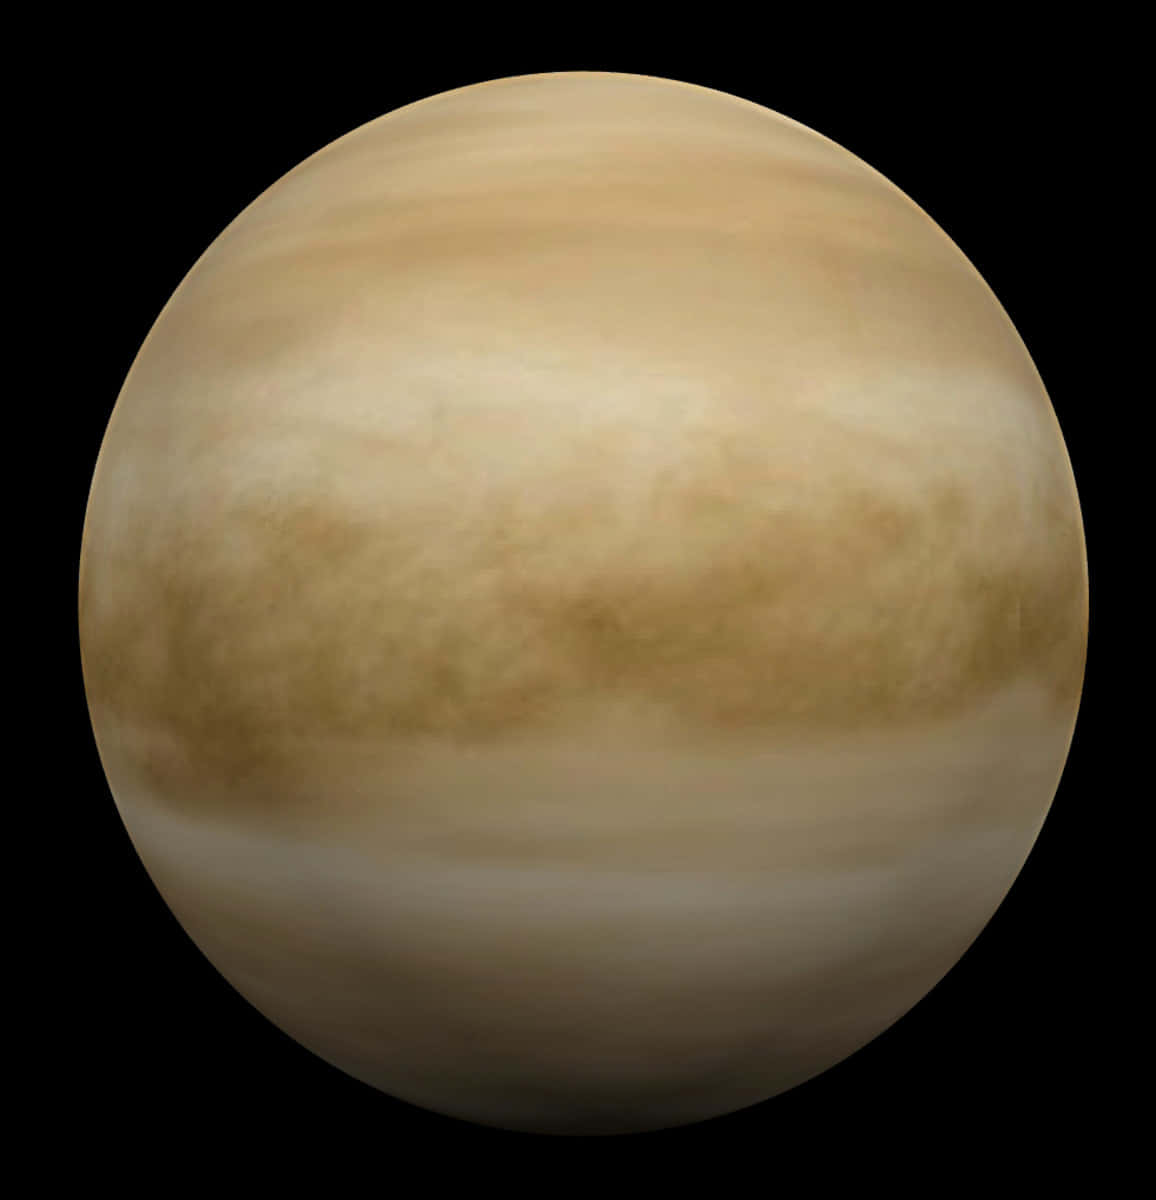 The mysterious planet Venus seen in all its glory.